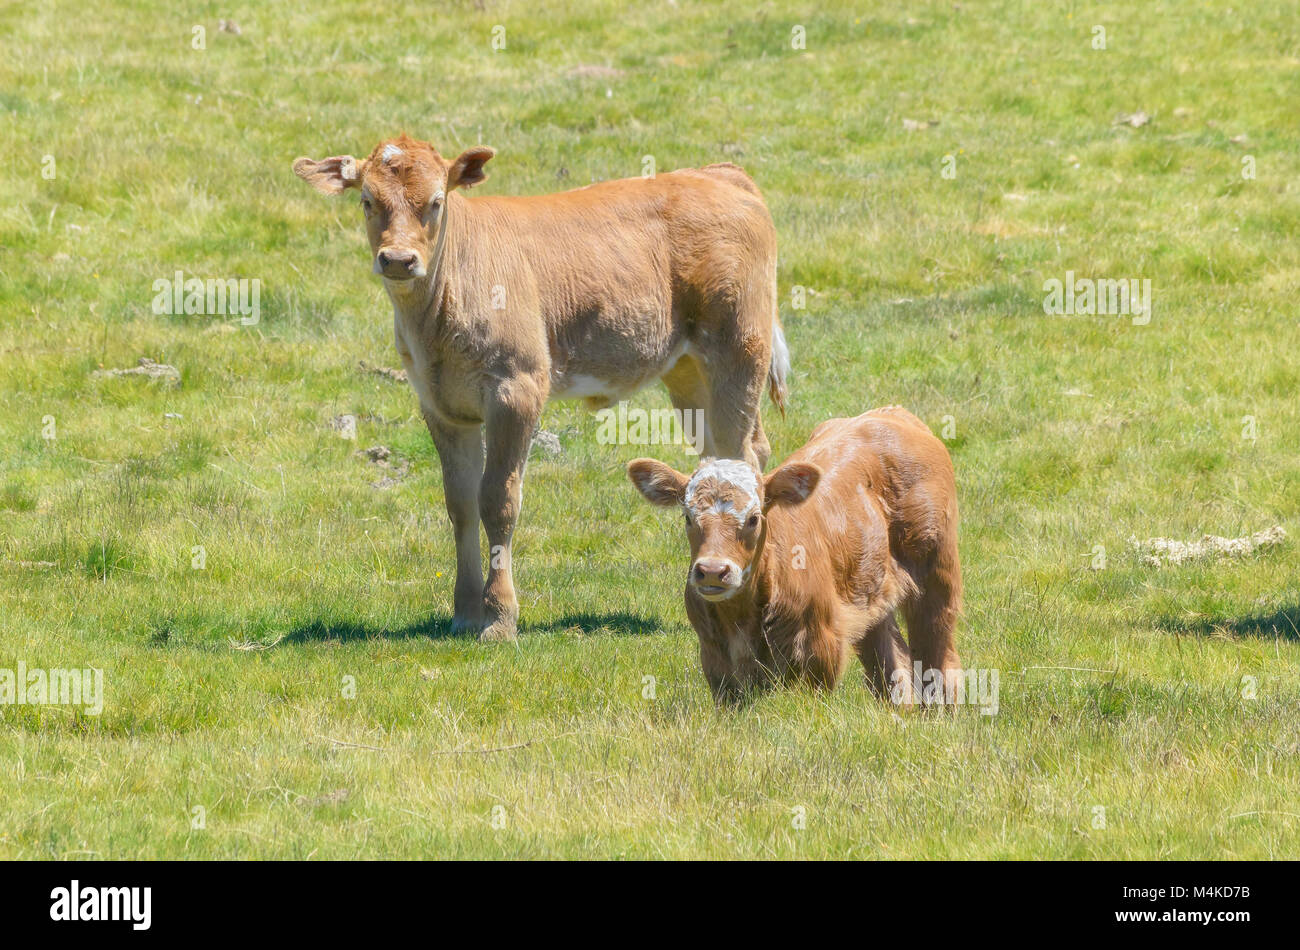 Two beautiful brown calves at the meadow. Sunny day of summer. Livestock breed at outdoor. Loving scene, of baby animals. Farm background. Stock Photo